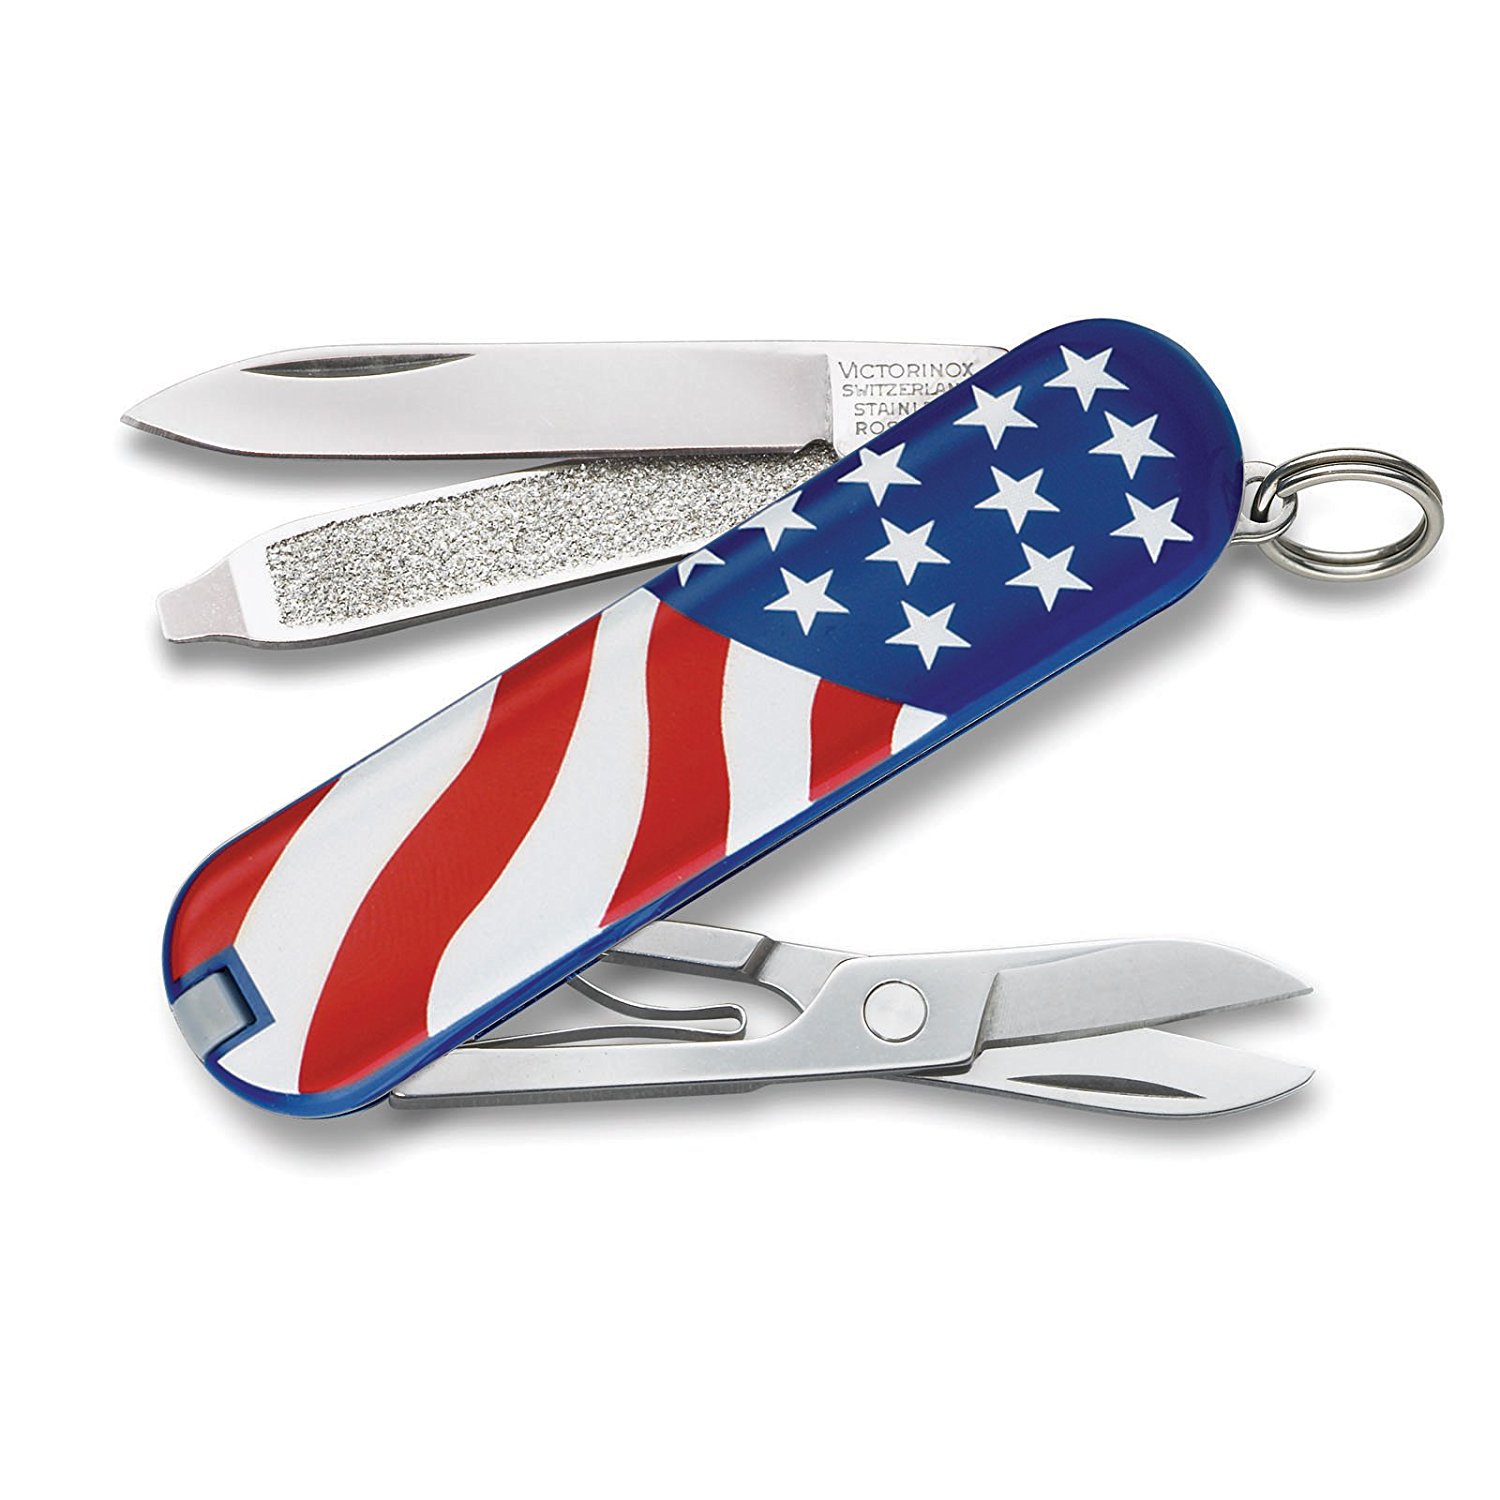 Victorinox Swiss Army Classic SD Pocket Knife – American Flag Version – Just $16.00!